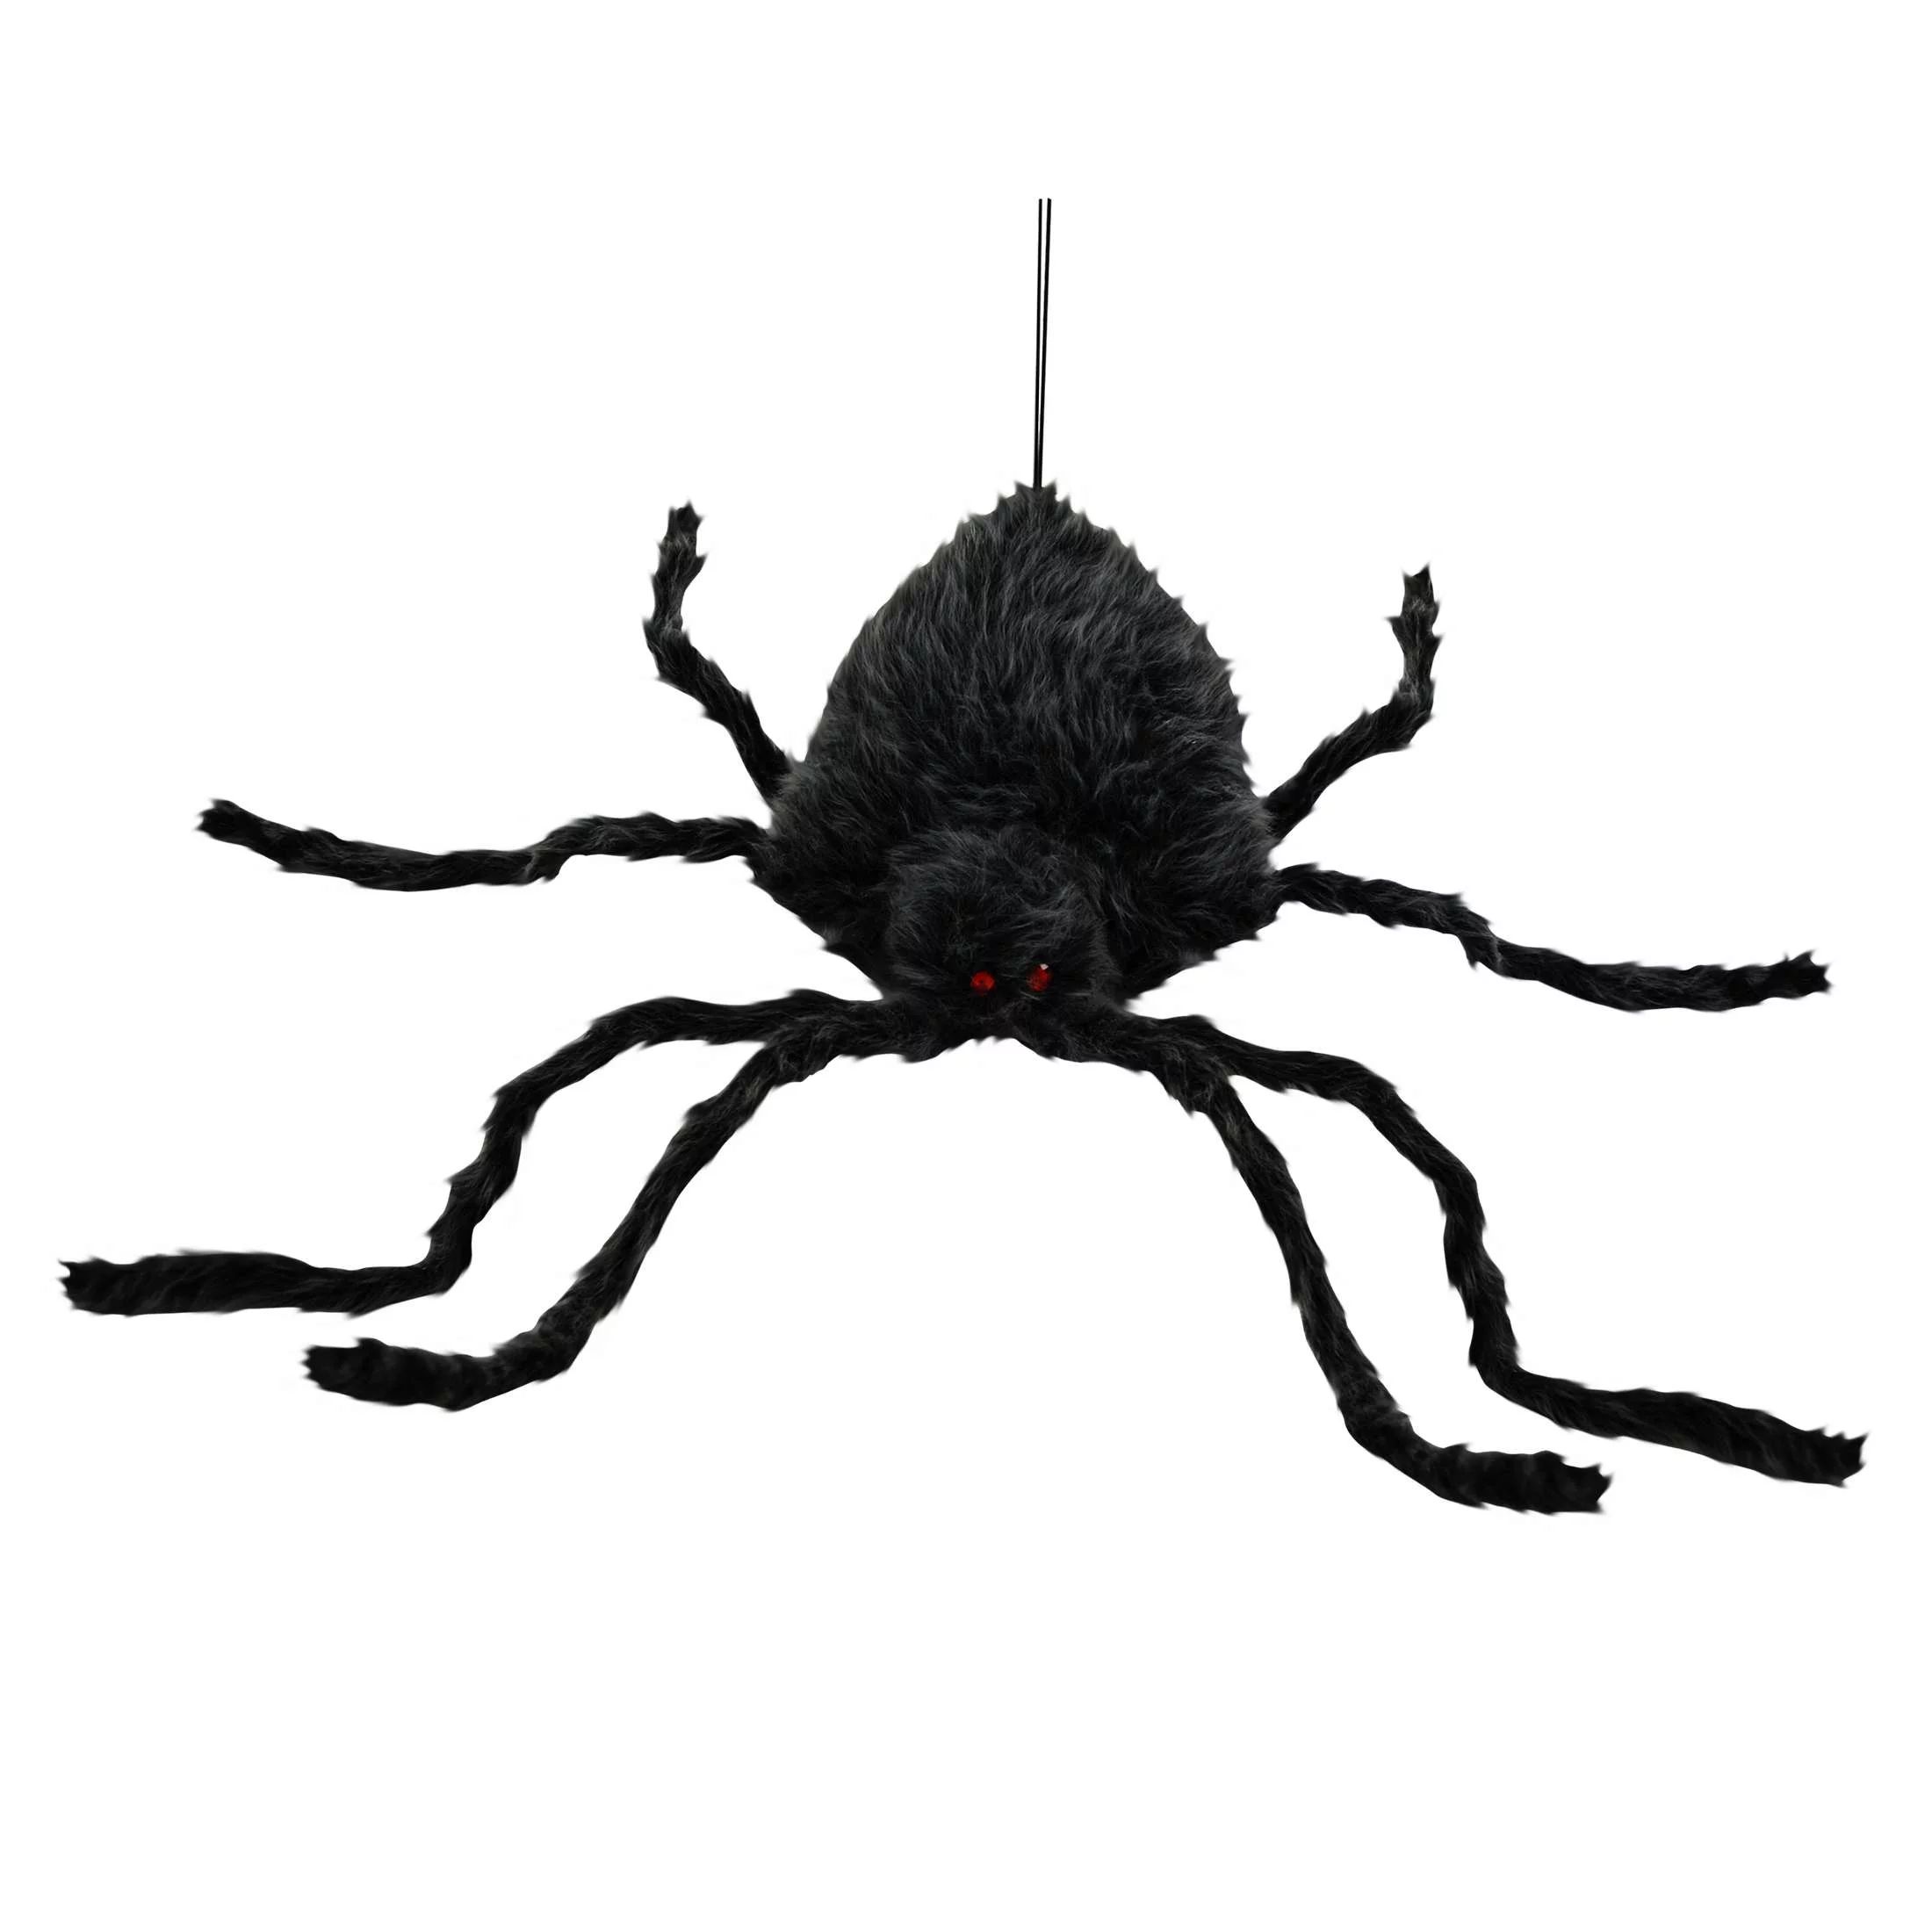 Halloween Posable Giant Hairy Spider Decoration, Black, by Way To Celebrate | Walmart (US)